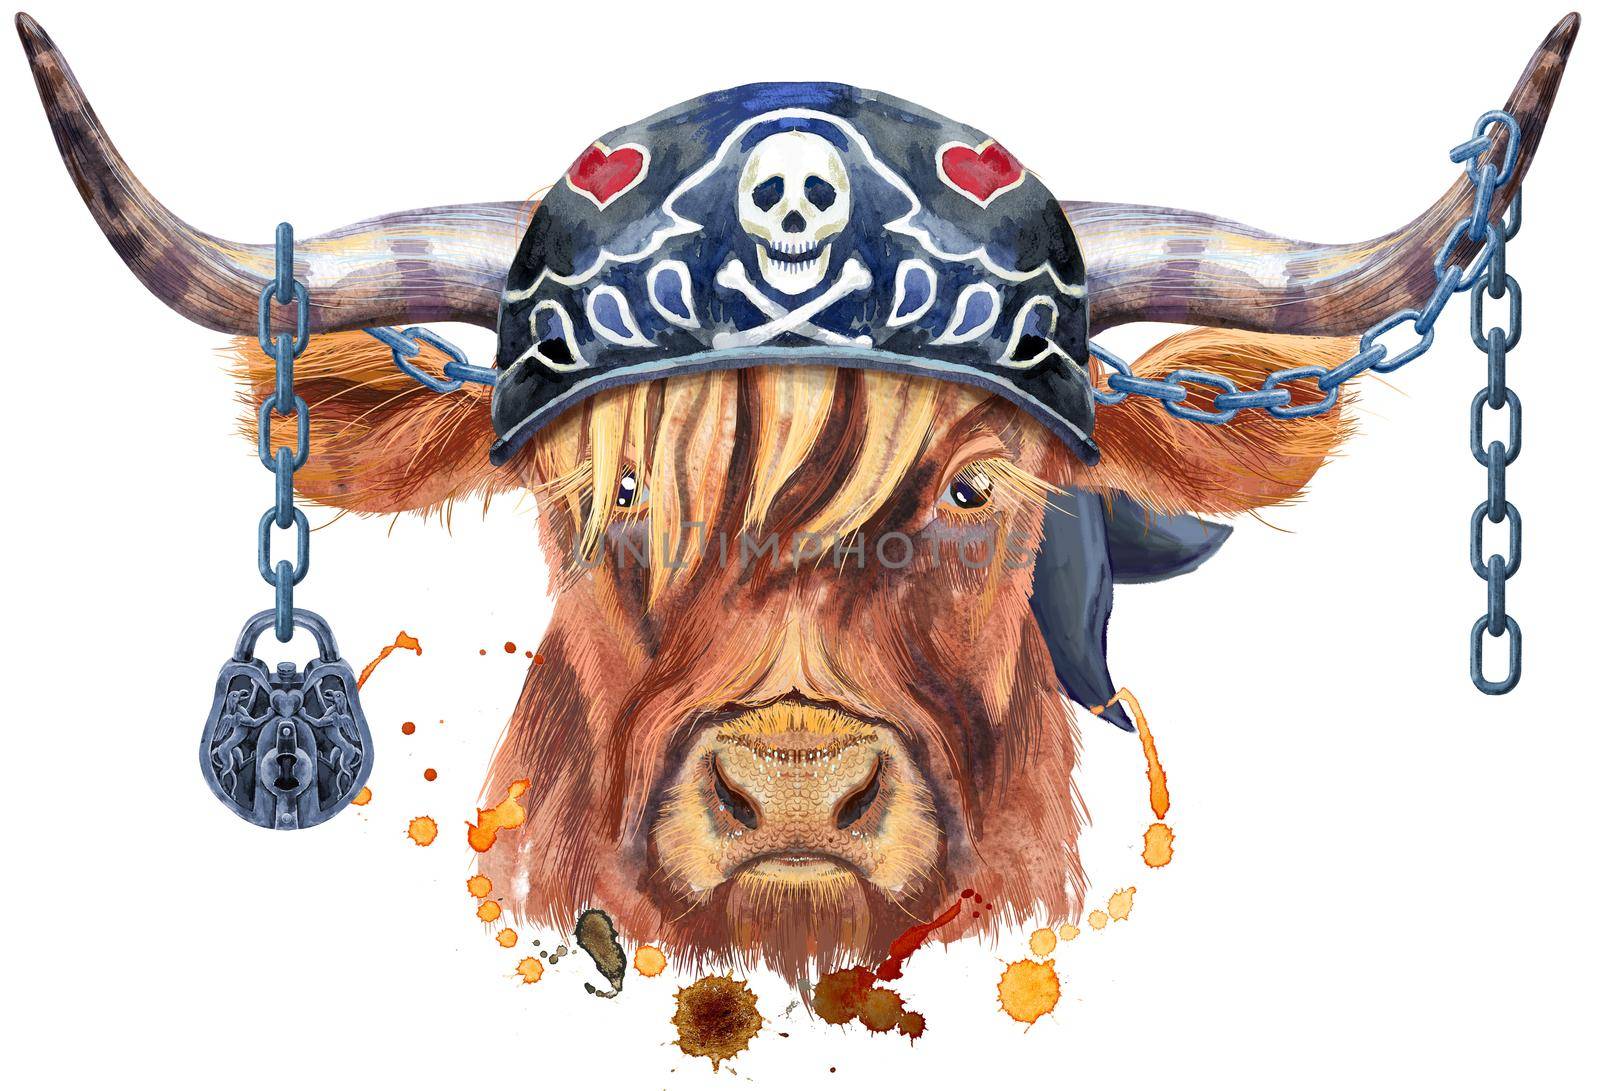 Bull in biker bandana and chains watercolor graphics. Bull animal illustration with splash watercolor textured background.